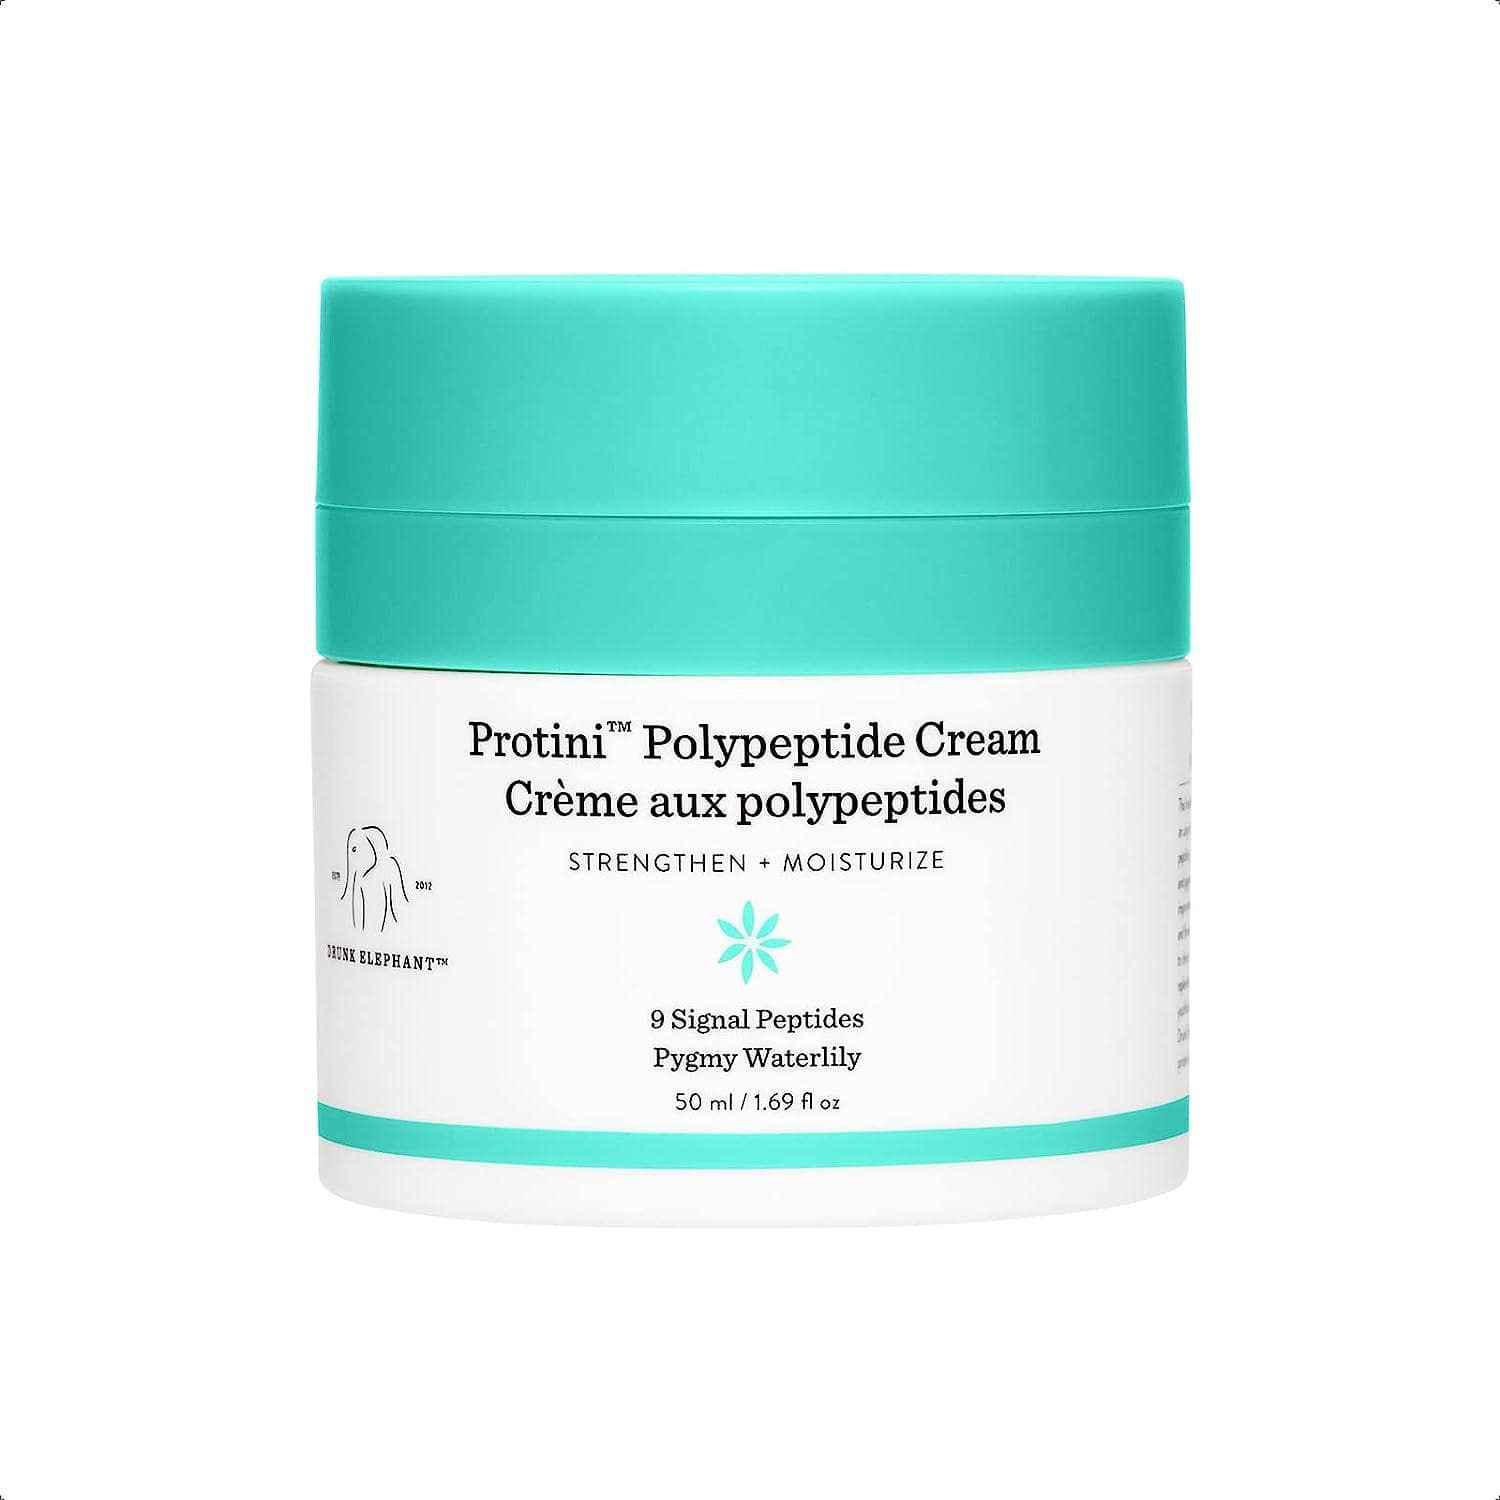 Drunk Elephant's Protini Polypeptide Cream- The Ultimate Skin Protein Boost for Radiant Health.